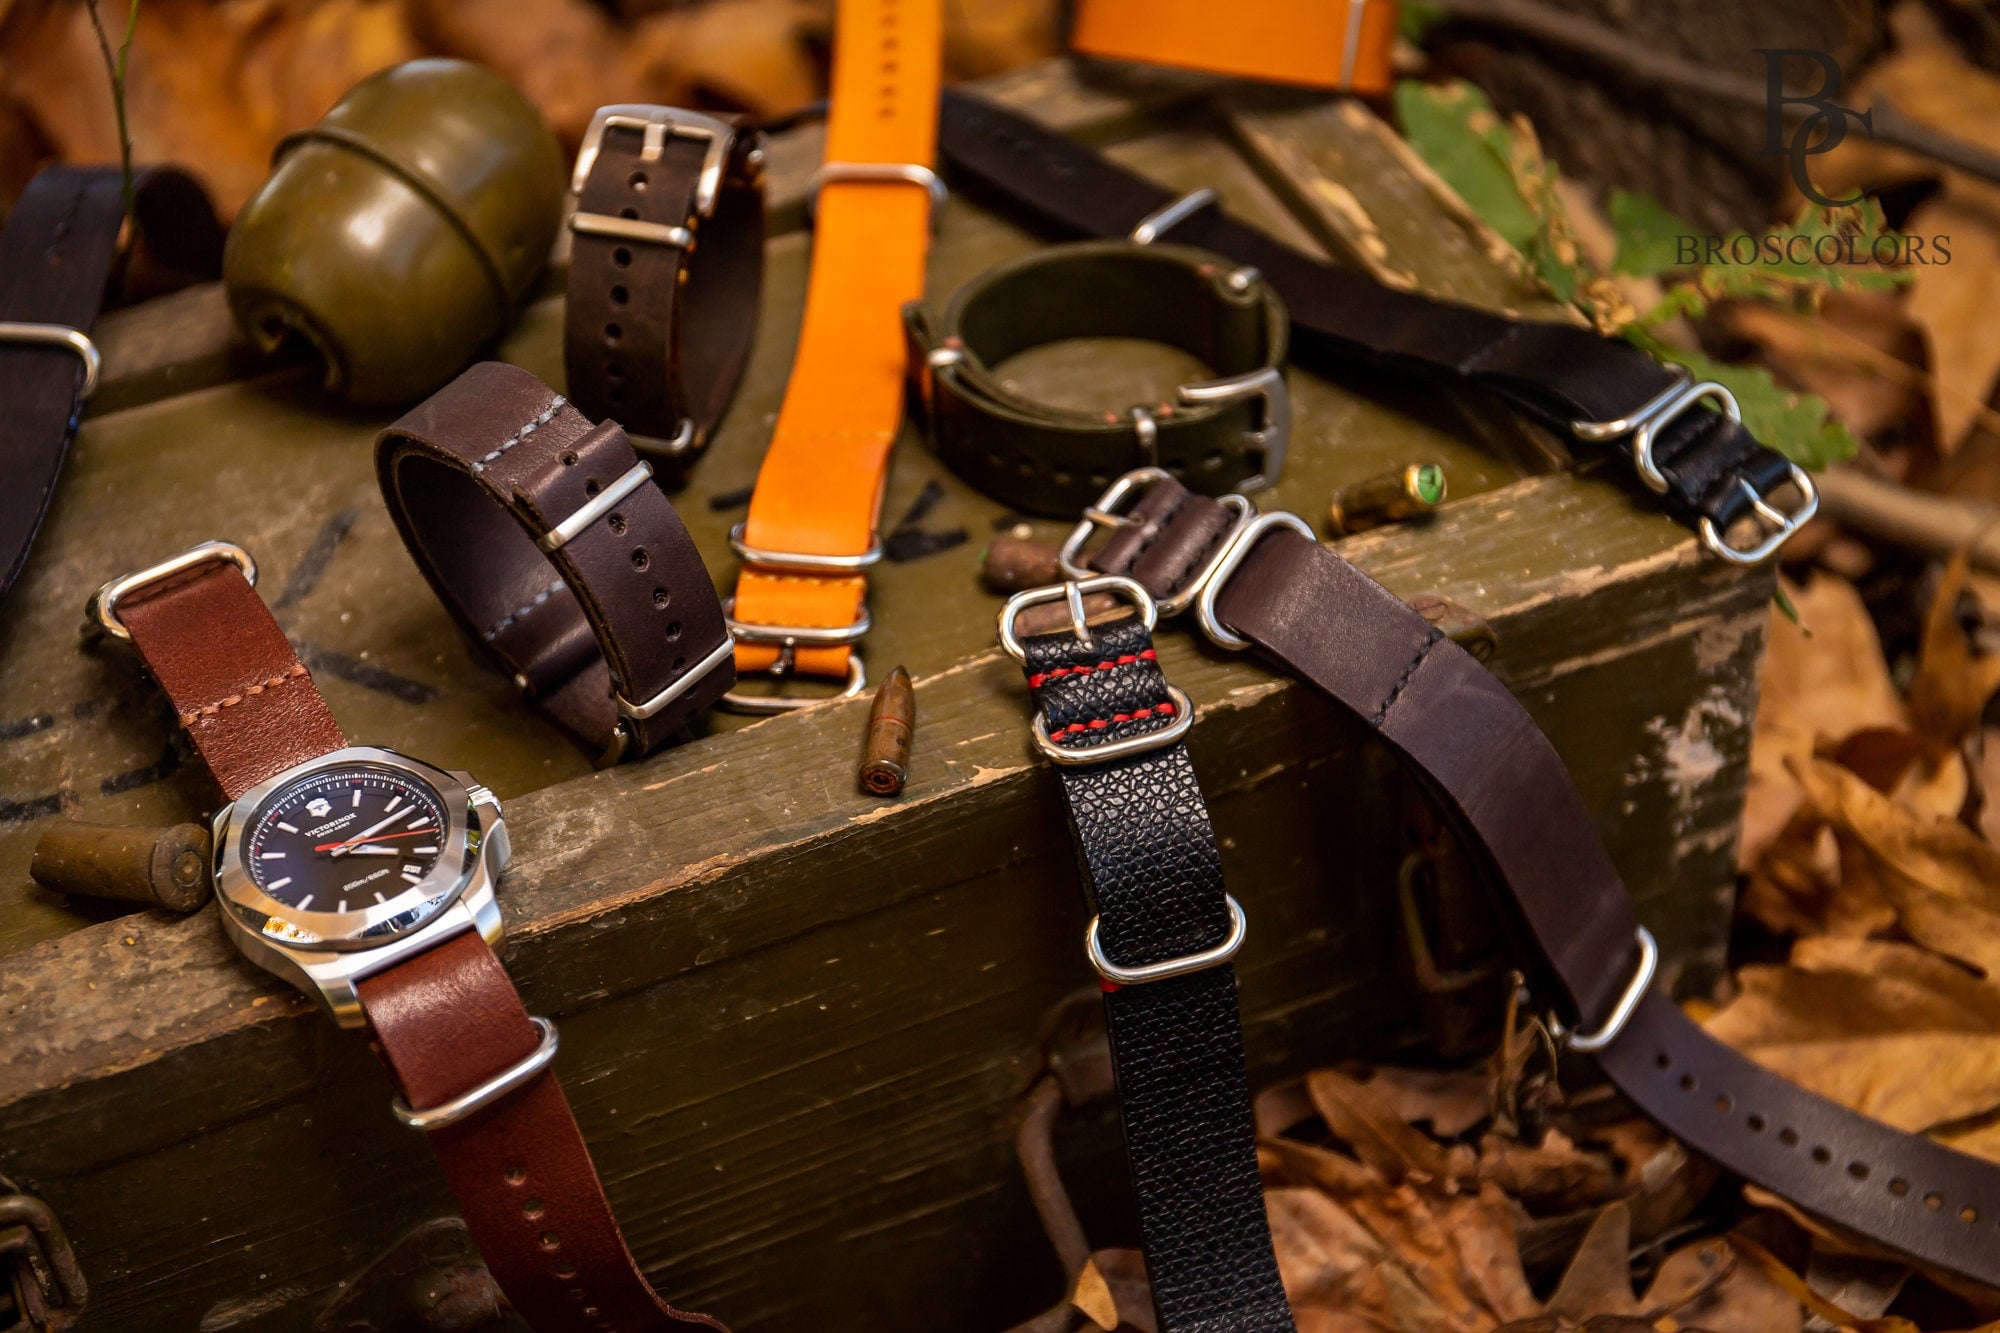 Long Leather Watch Strap